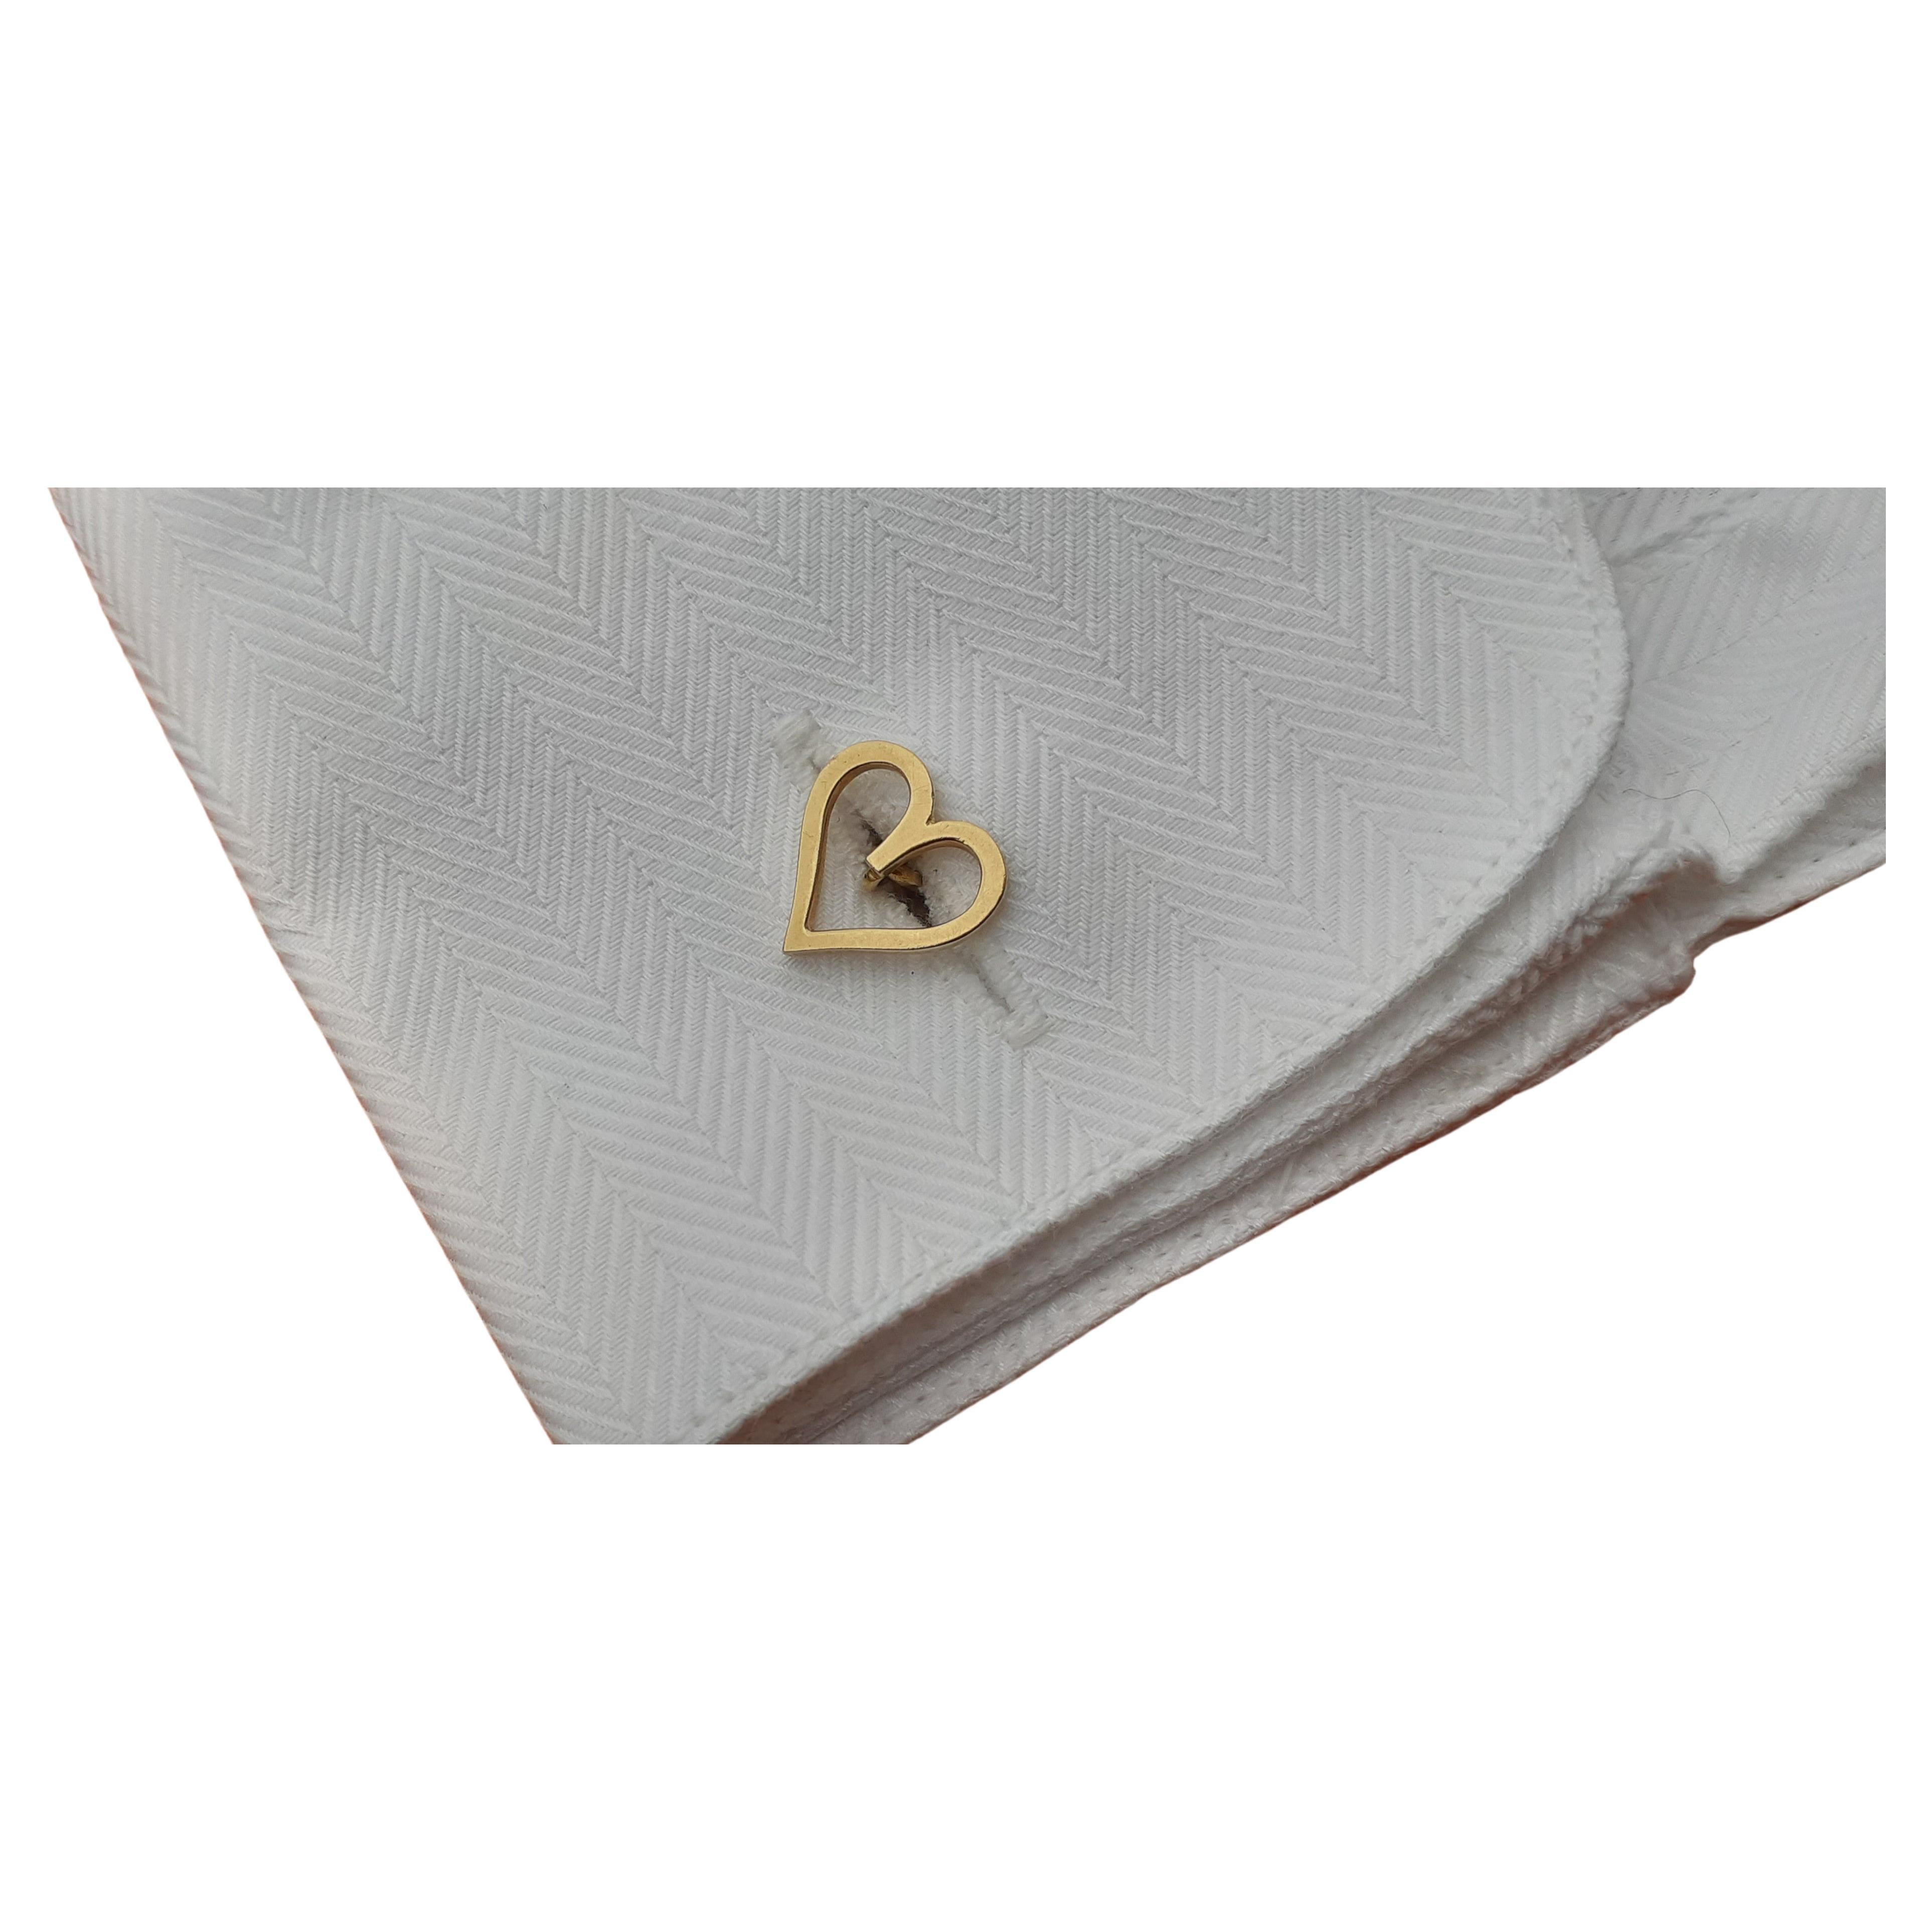 Exceptional Hermès Heart Shaped Cufflinks in Yellow Gold